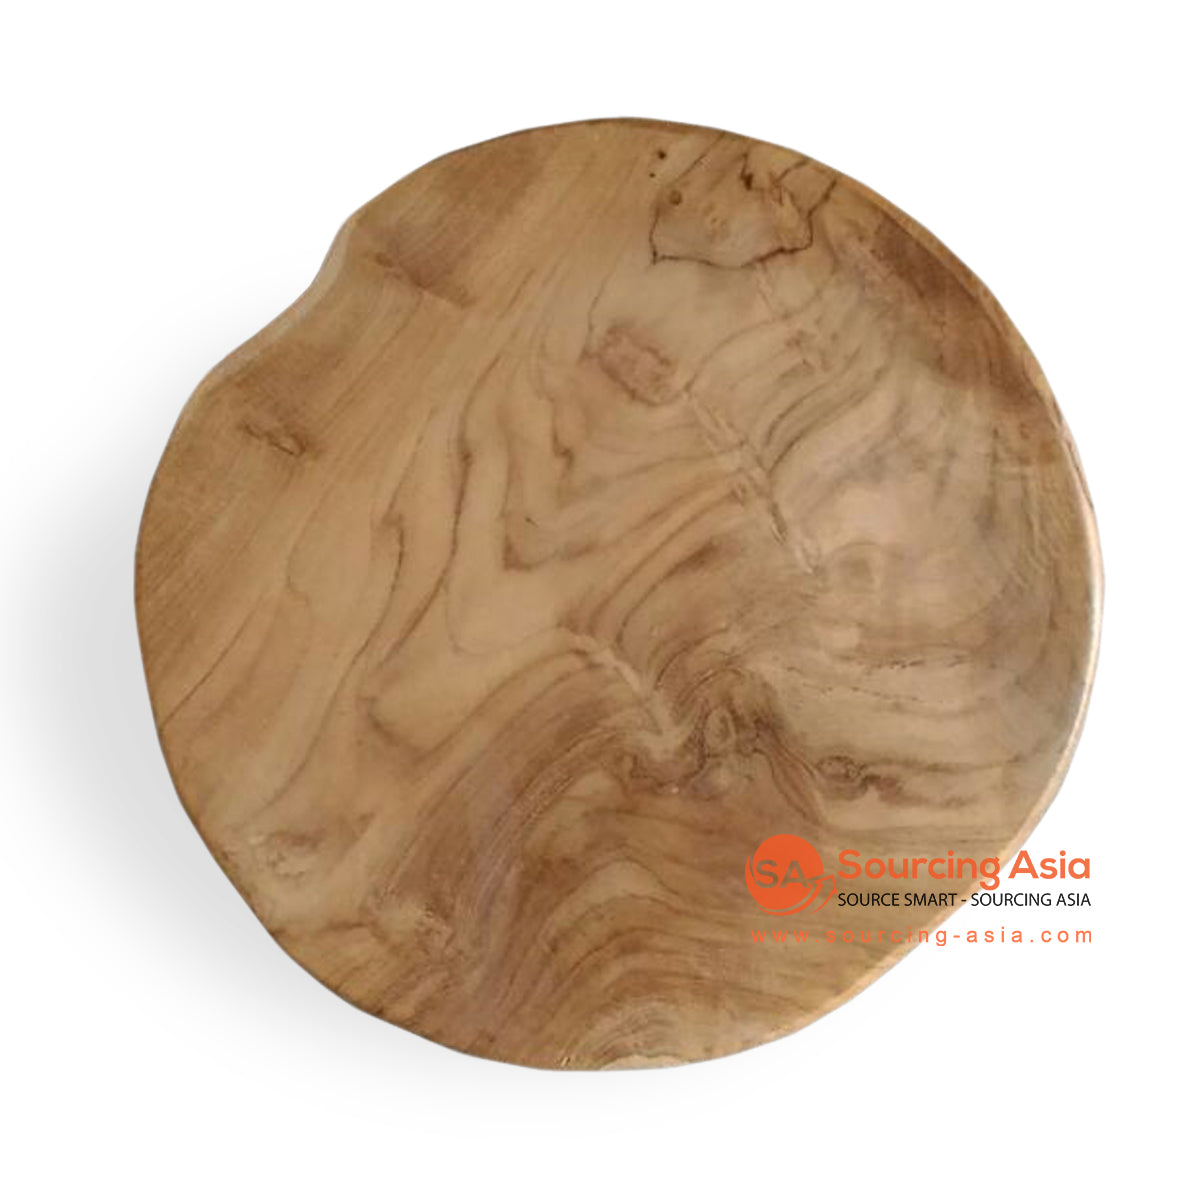 BMW111R NATURAL WOODEN ROUND CHOPPING BOARD